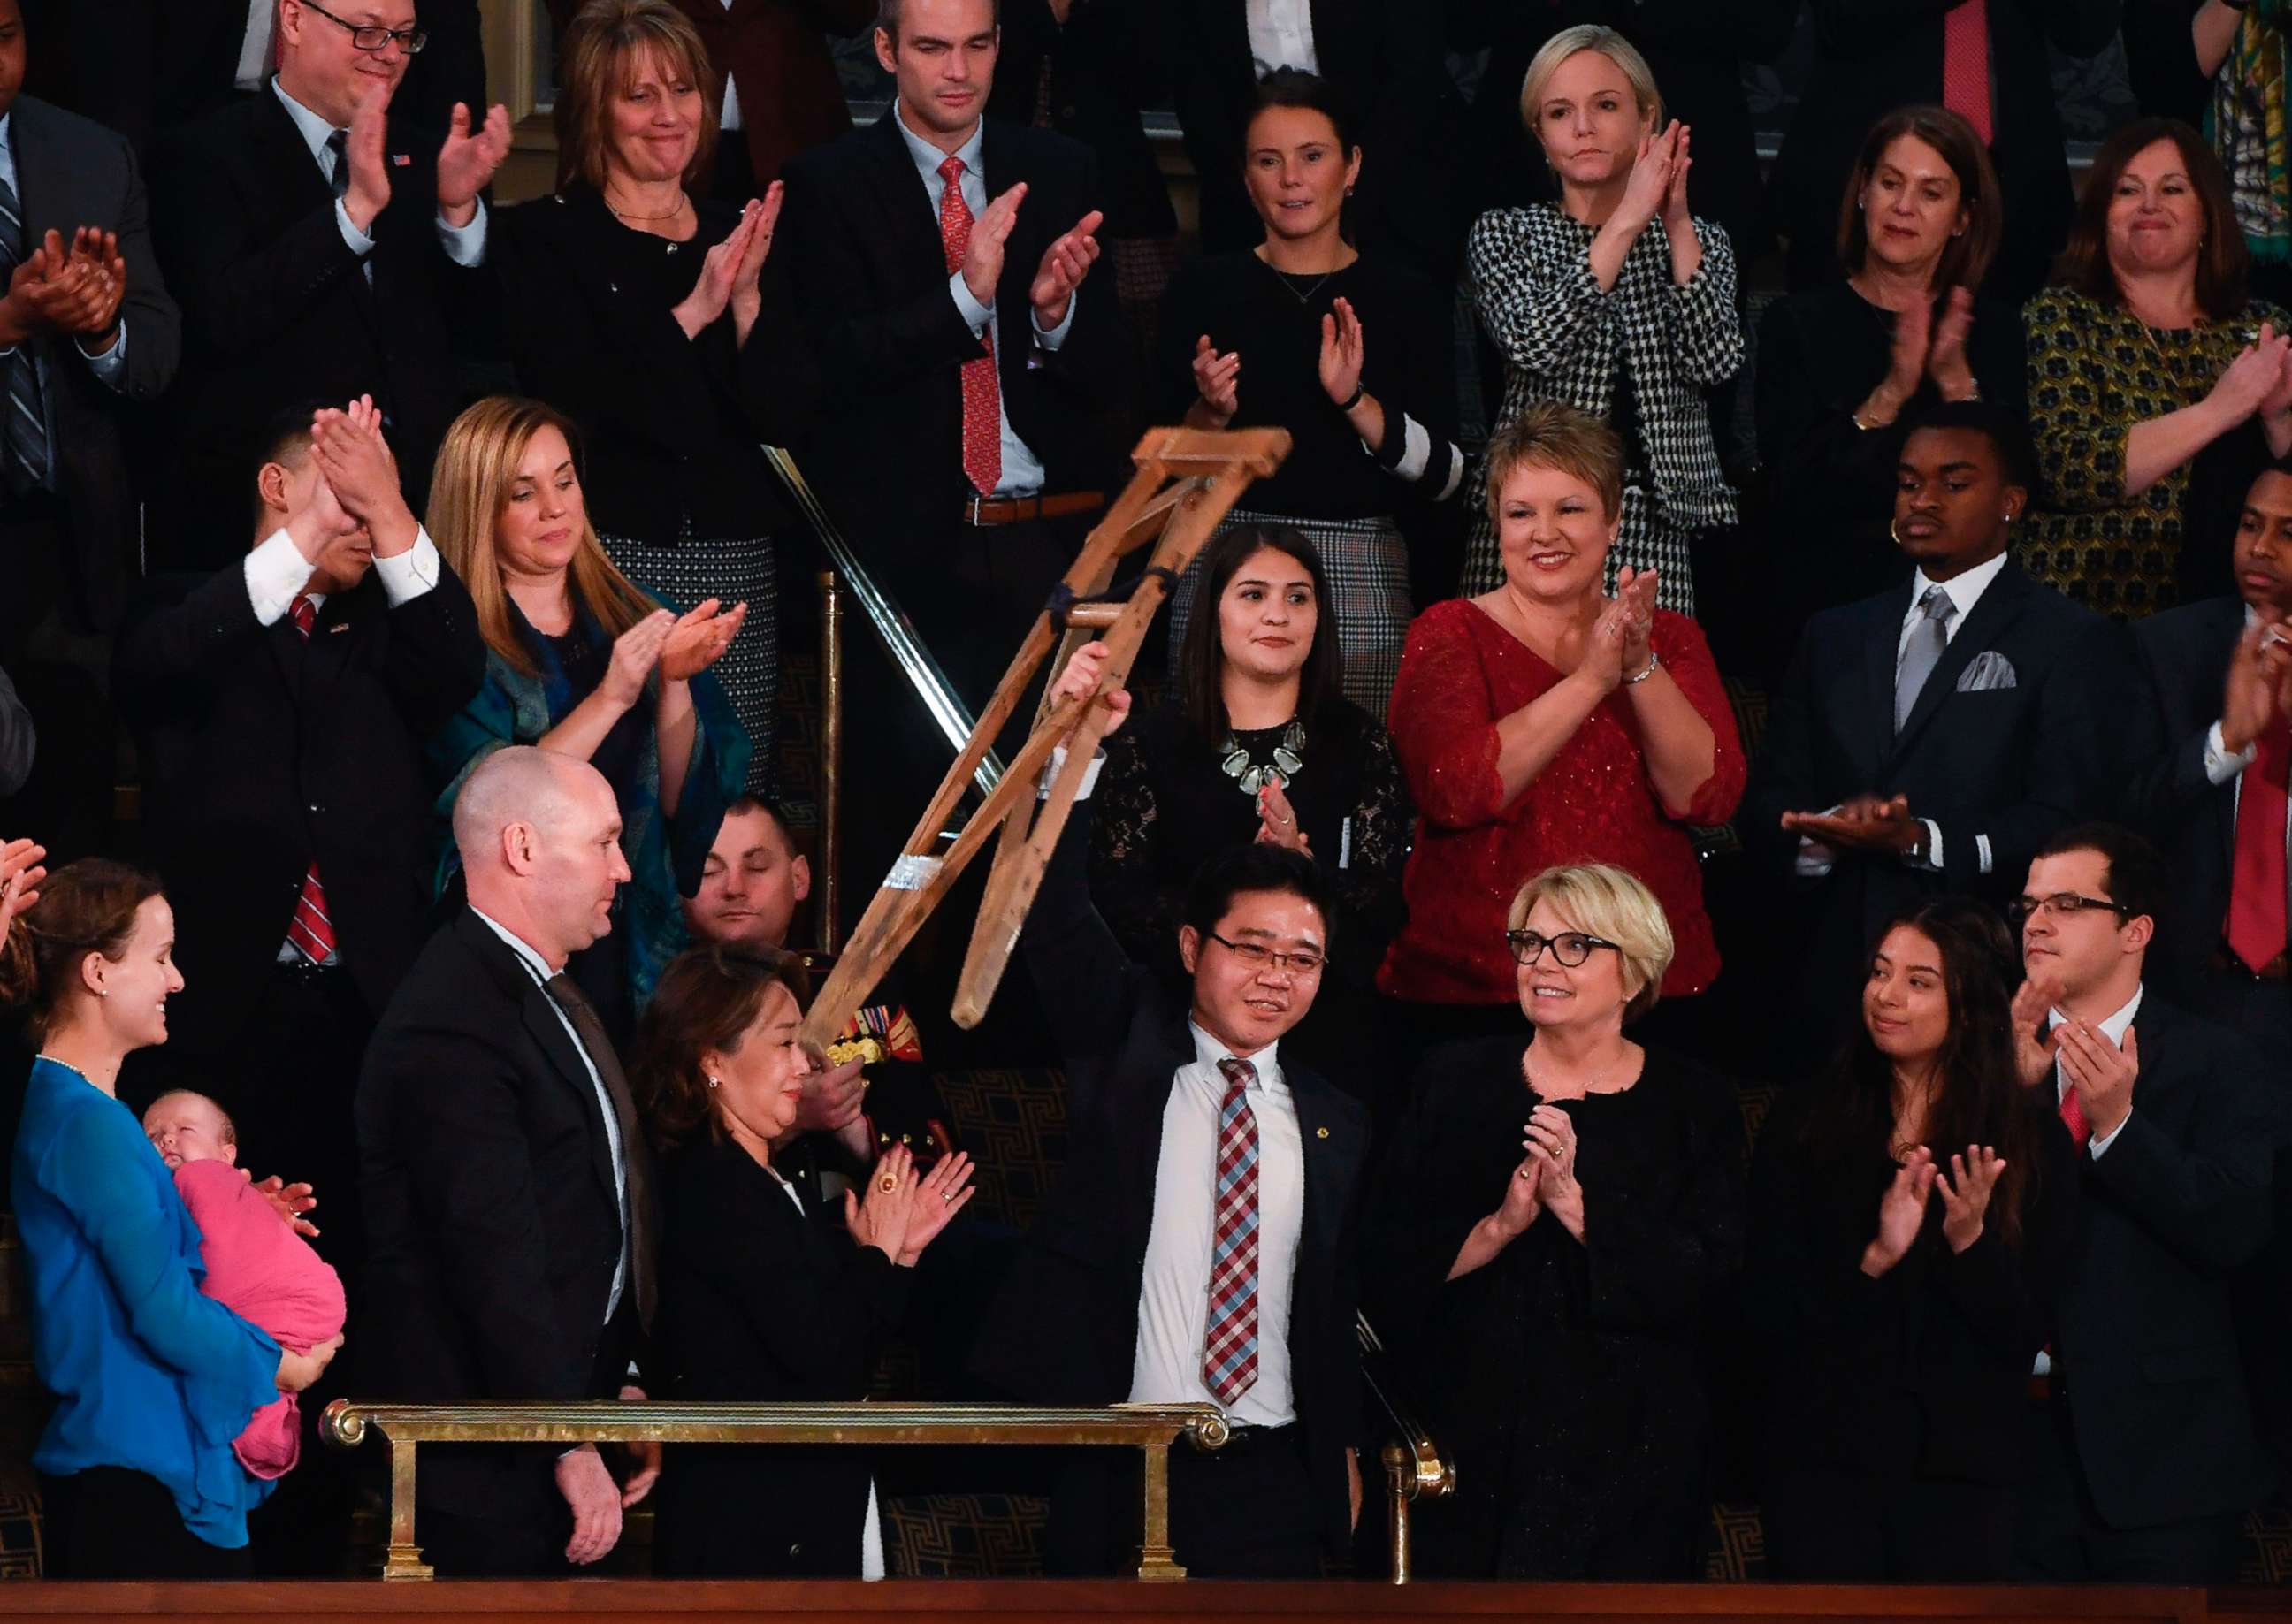 PHOTO: North Korean defector Ji Seong-ho raises his crutches as President Donald Trump delivers his State of the Union address at the US Capitol in Washington, on Jan. 30, 2018.